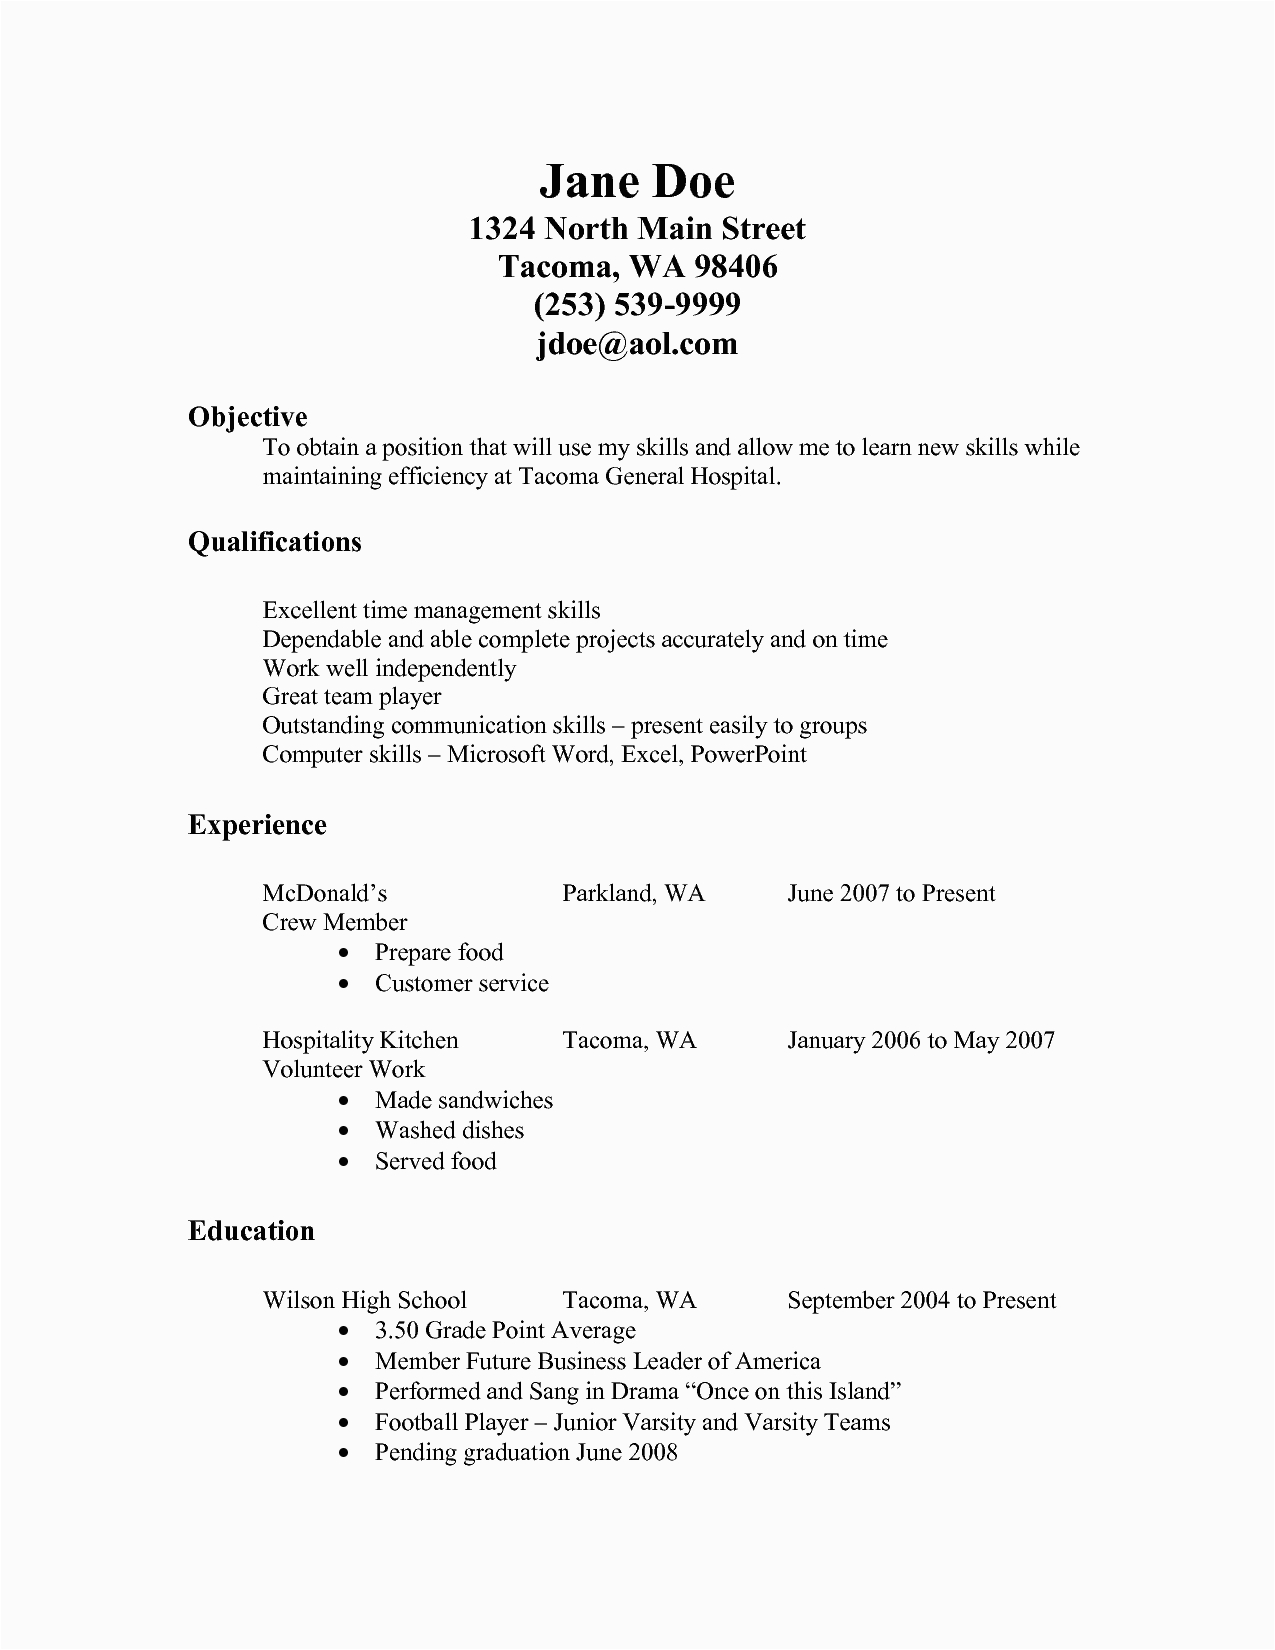 Fast Food Resume Sample with Experience Resume for Fastfood Fast Food Resume Examples Resume